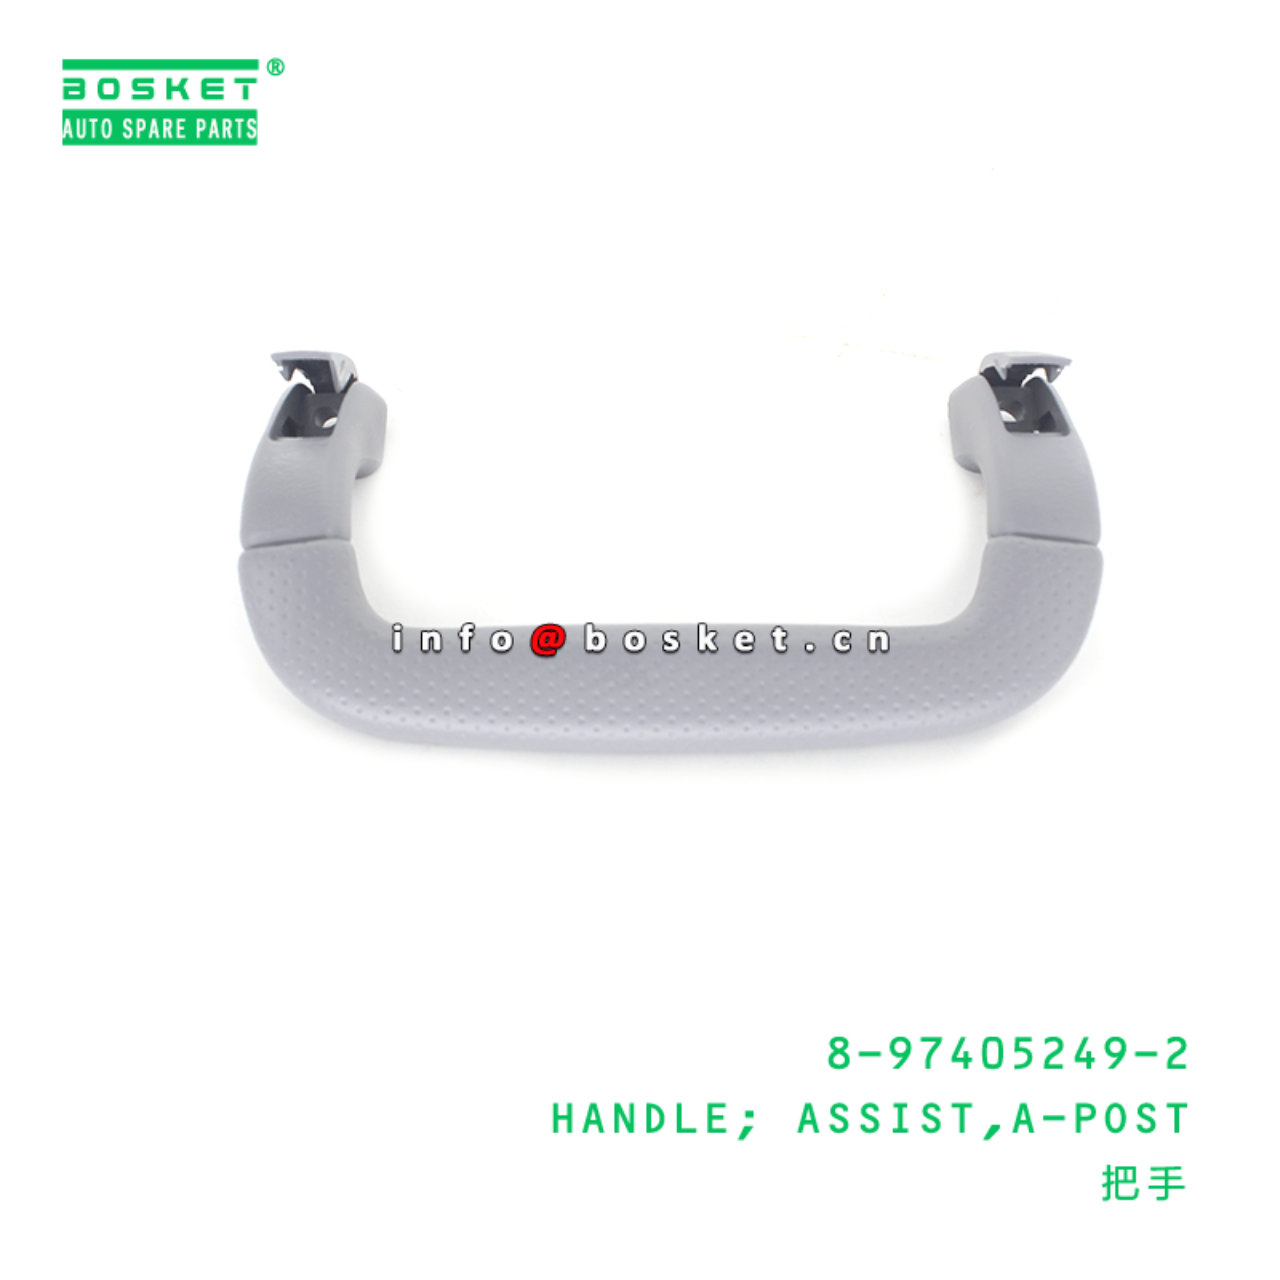 8-97405249-2 A-Post Assist Handle 8974052492 Suitable for ISUZU NMR